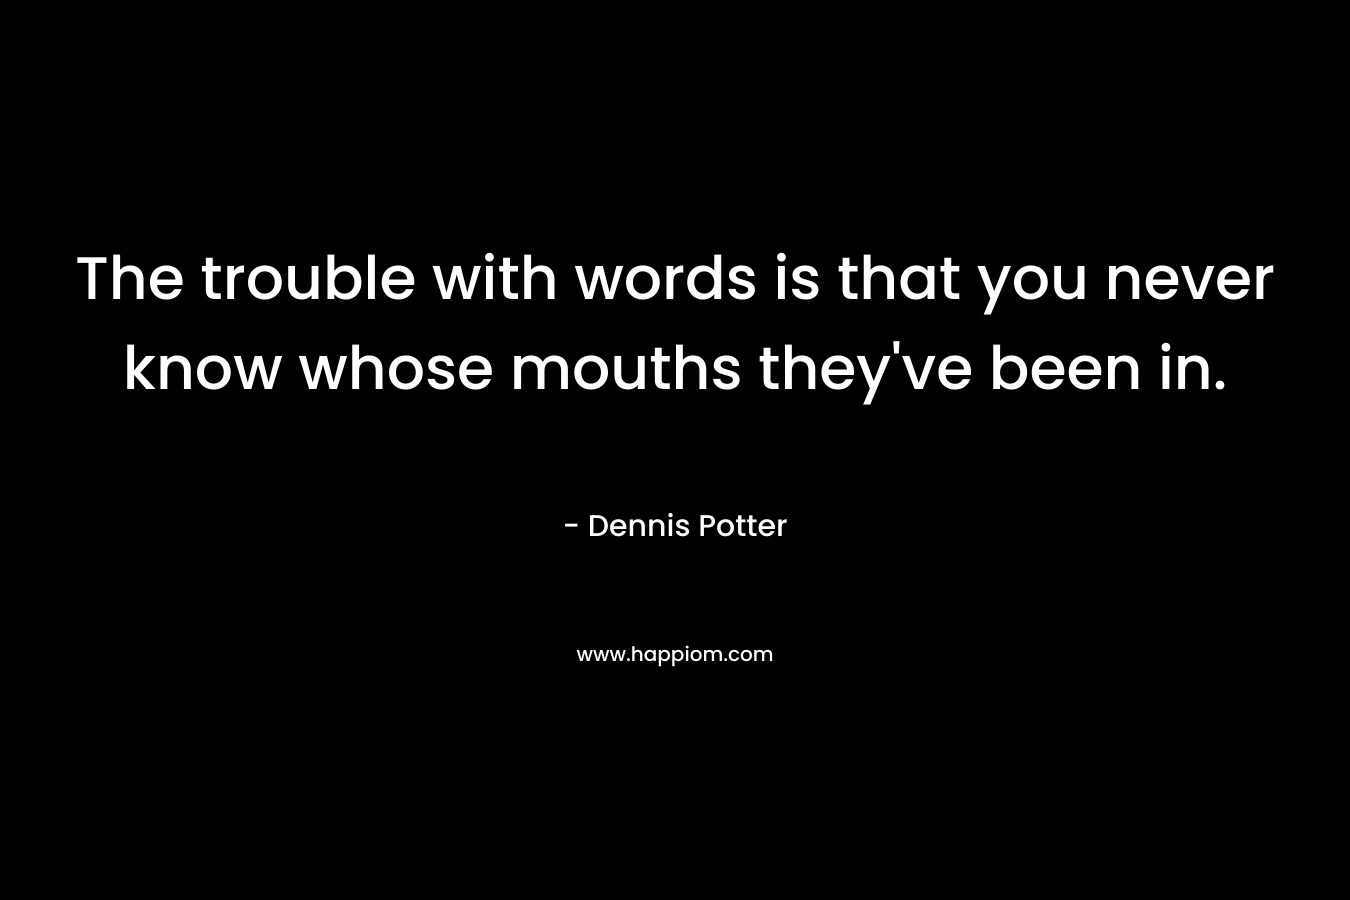 The trouble with words is that you never know whose mouths they've been in.